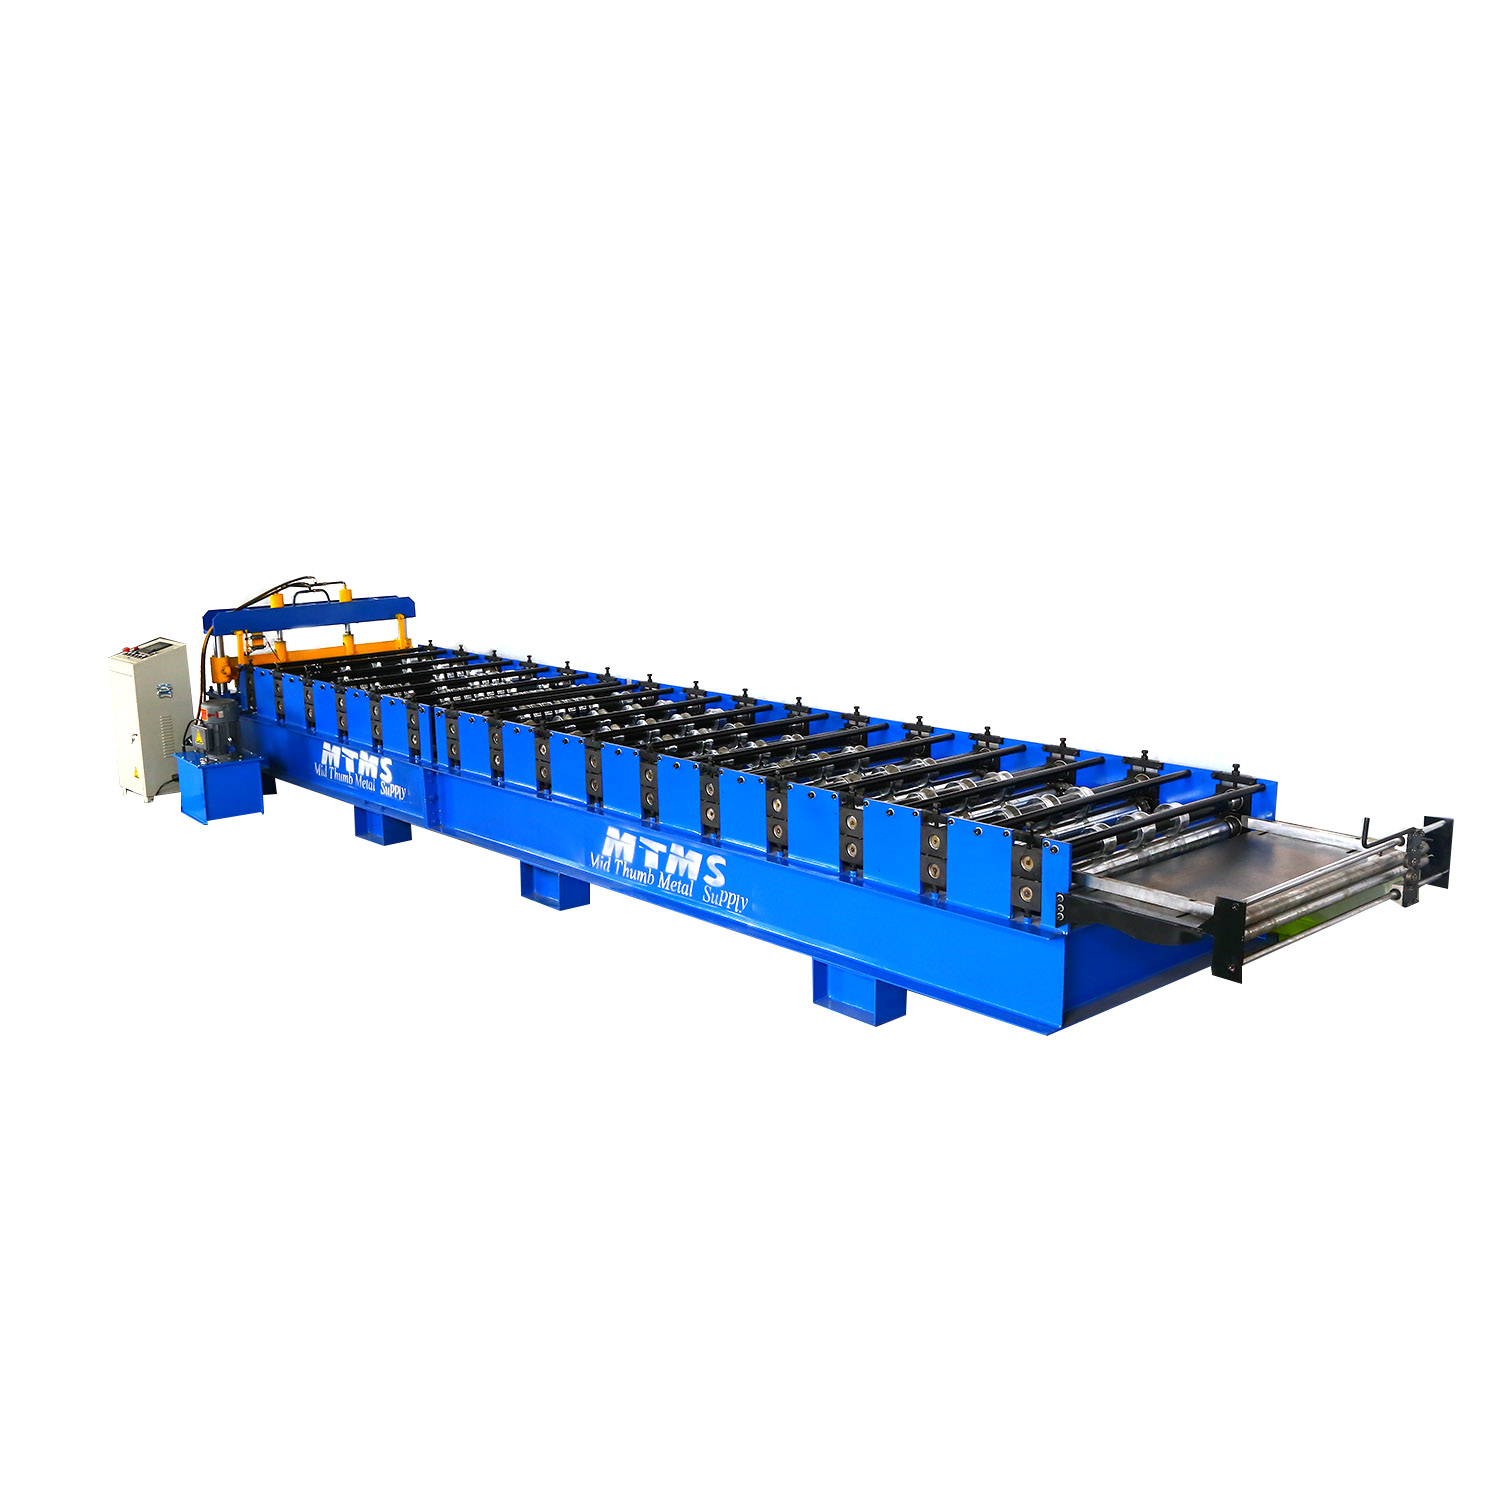 New IBR Trapezoid 5 metal roofing tiles making machine roofing sheet making machinery/roll forming machine manufacturer